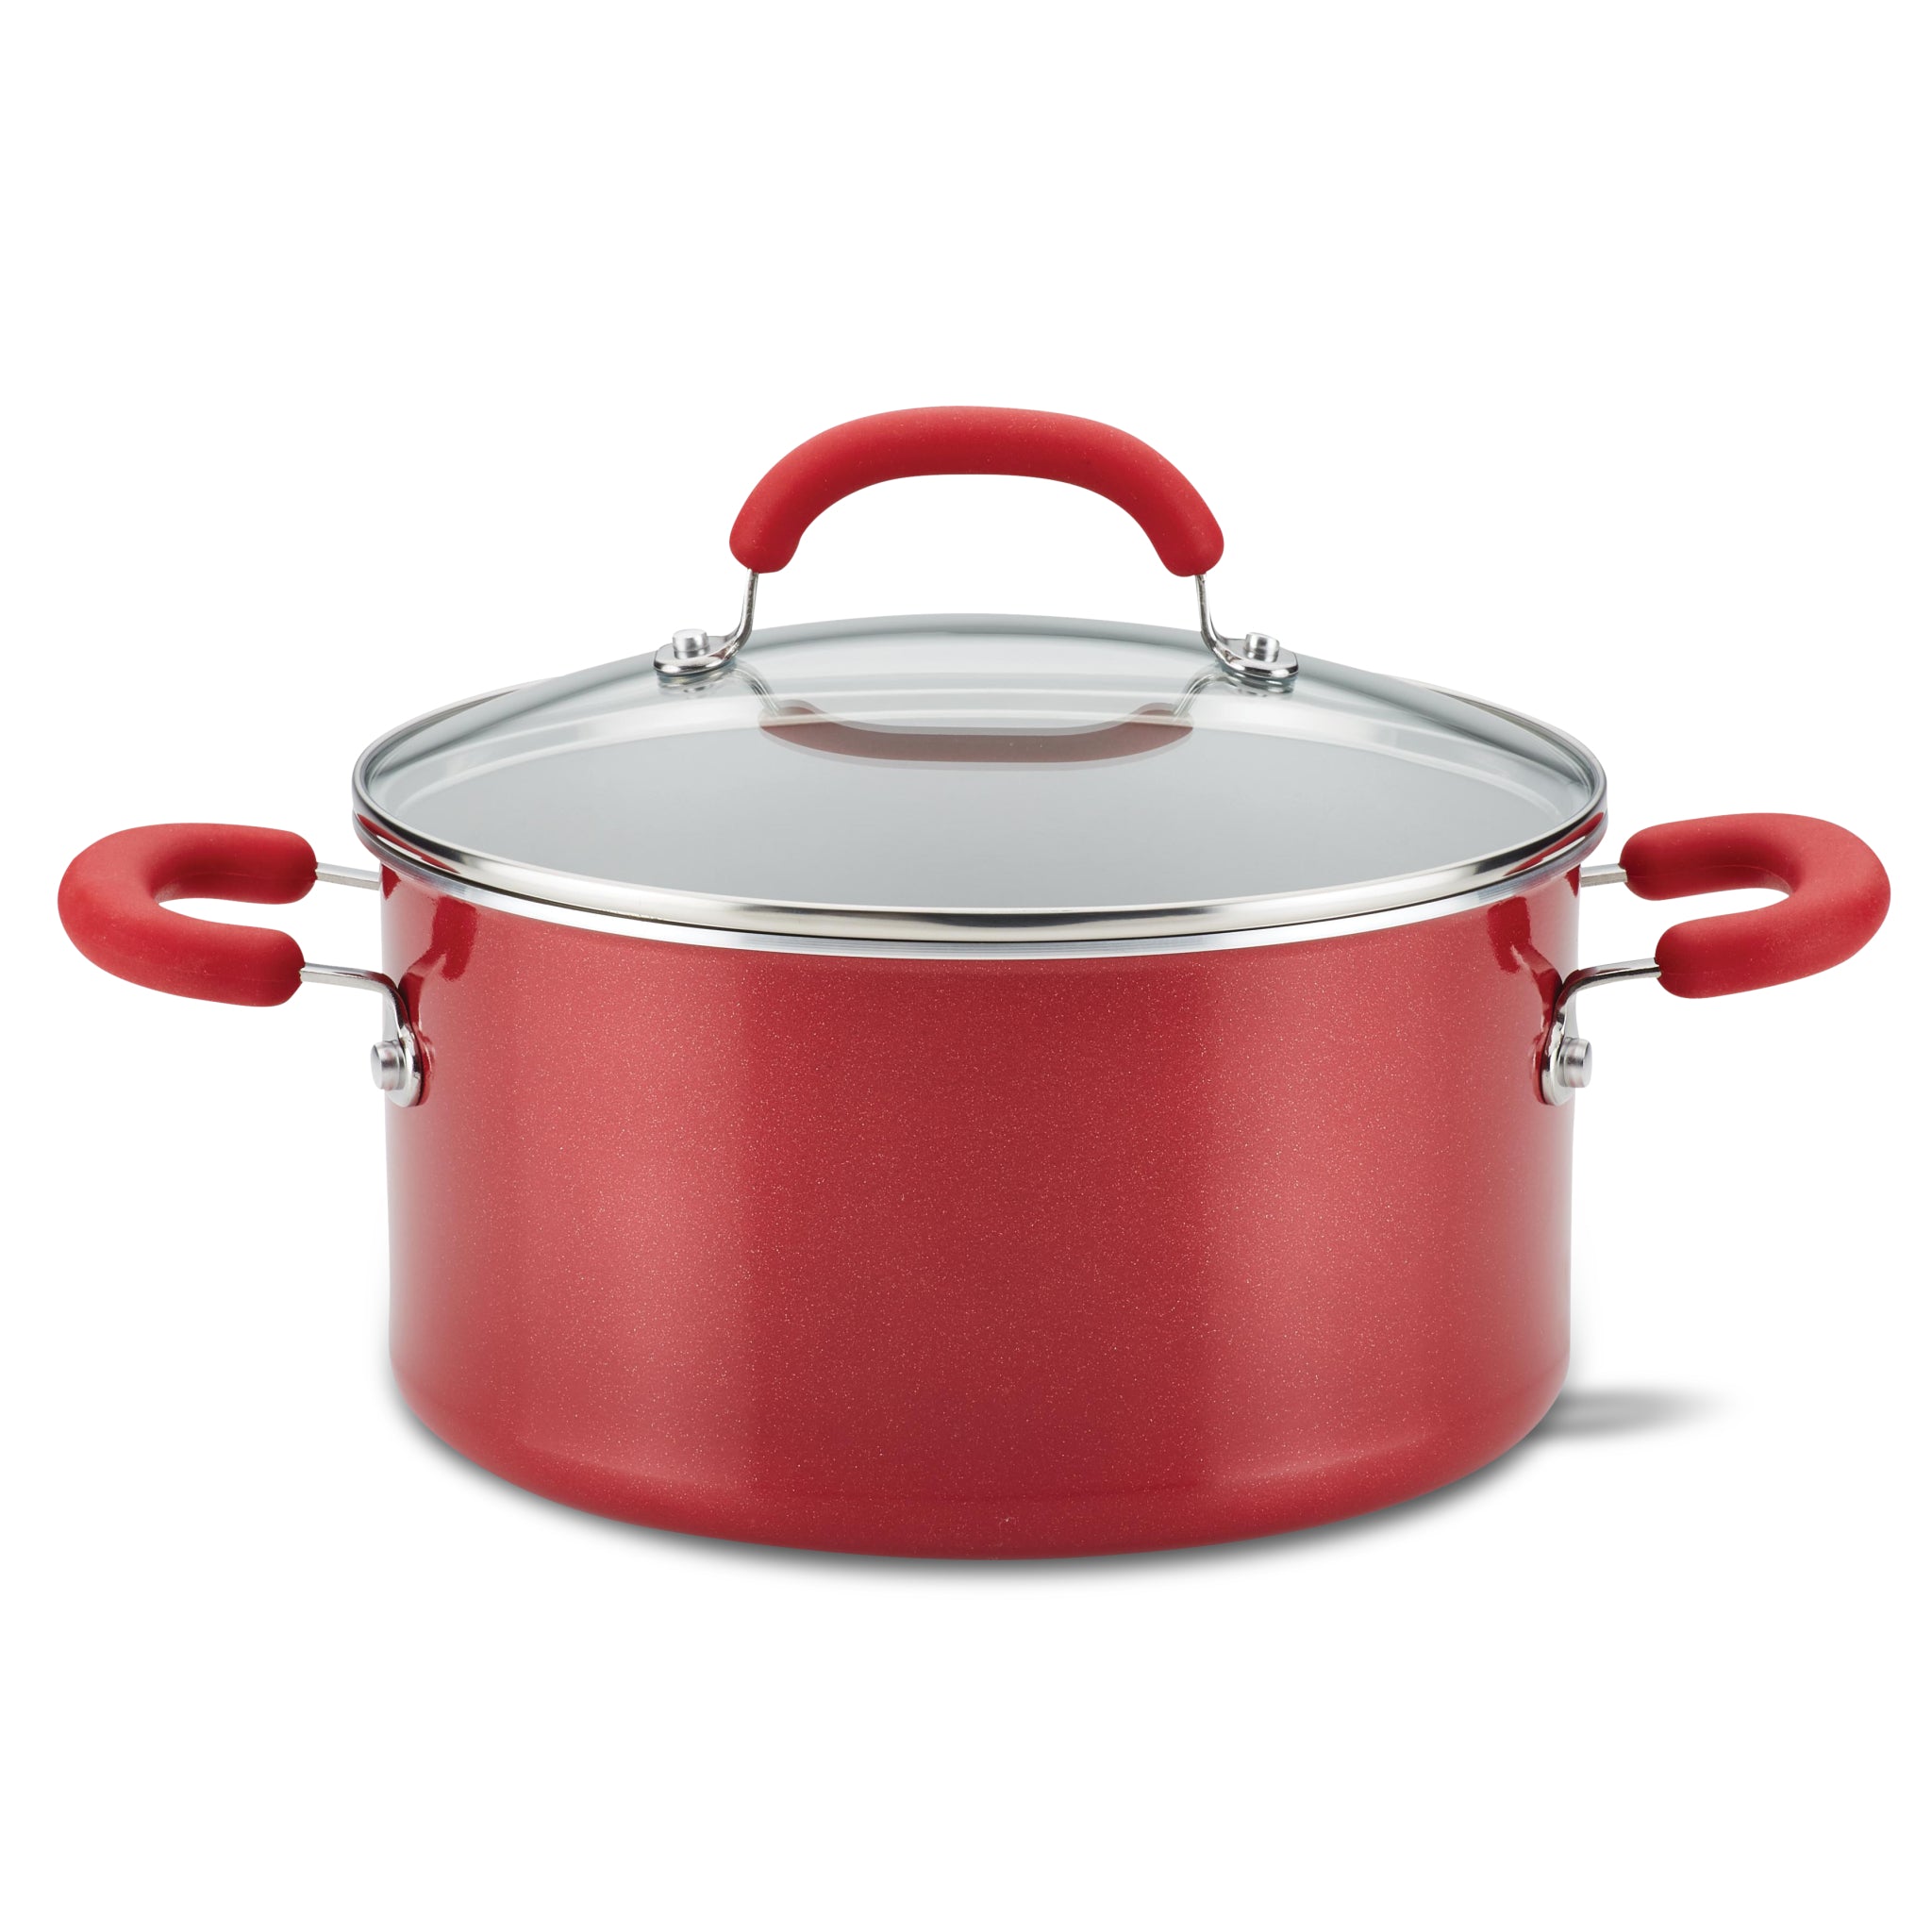 6-Quart Nonstick Induction Covered Stockpot